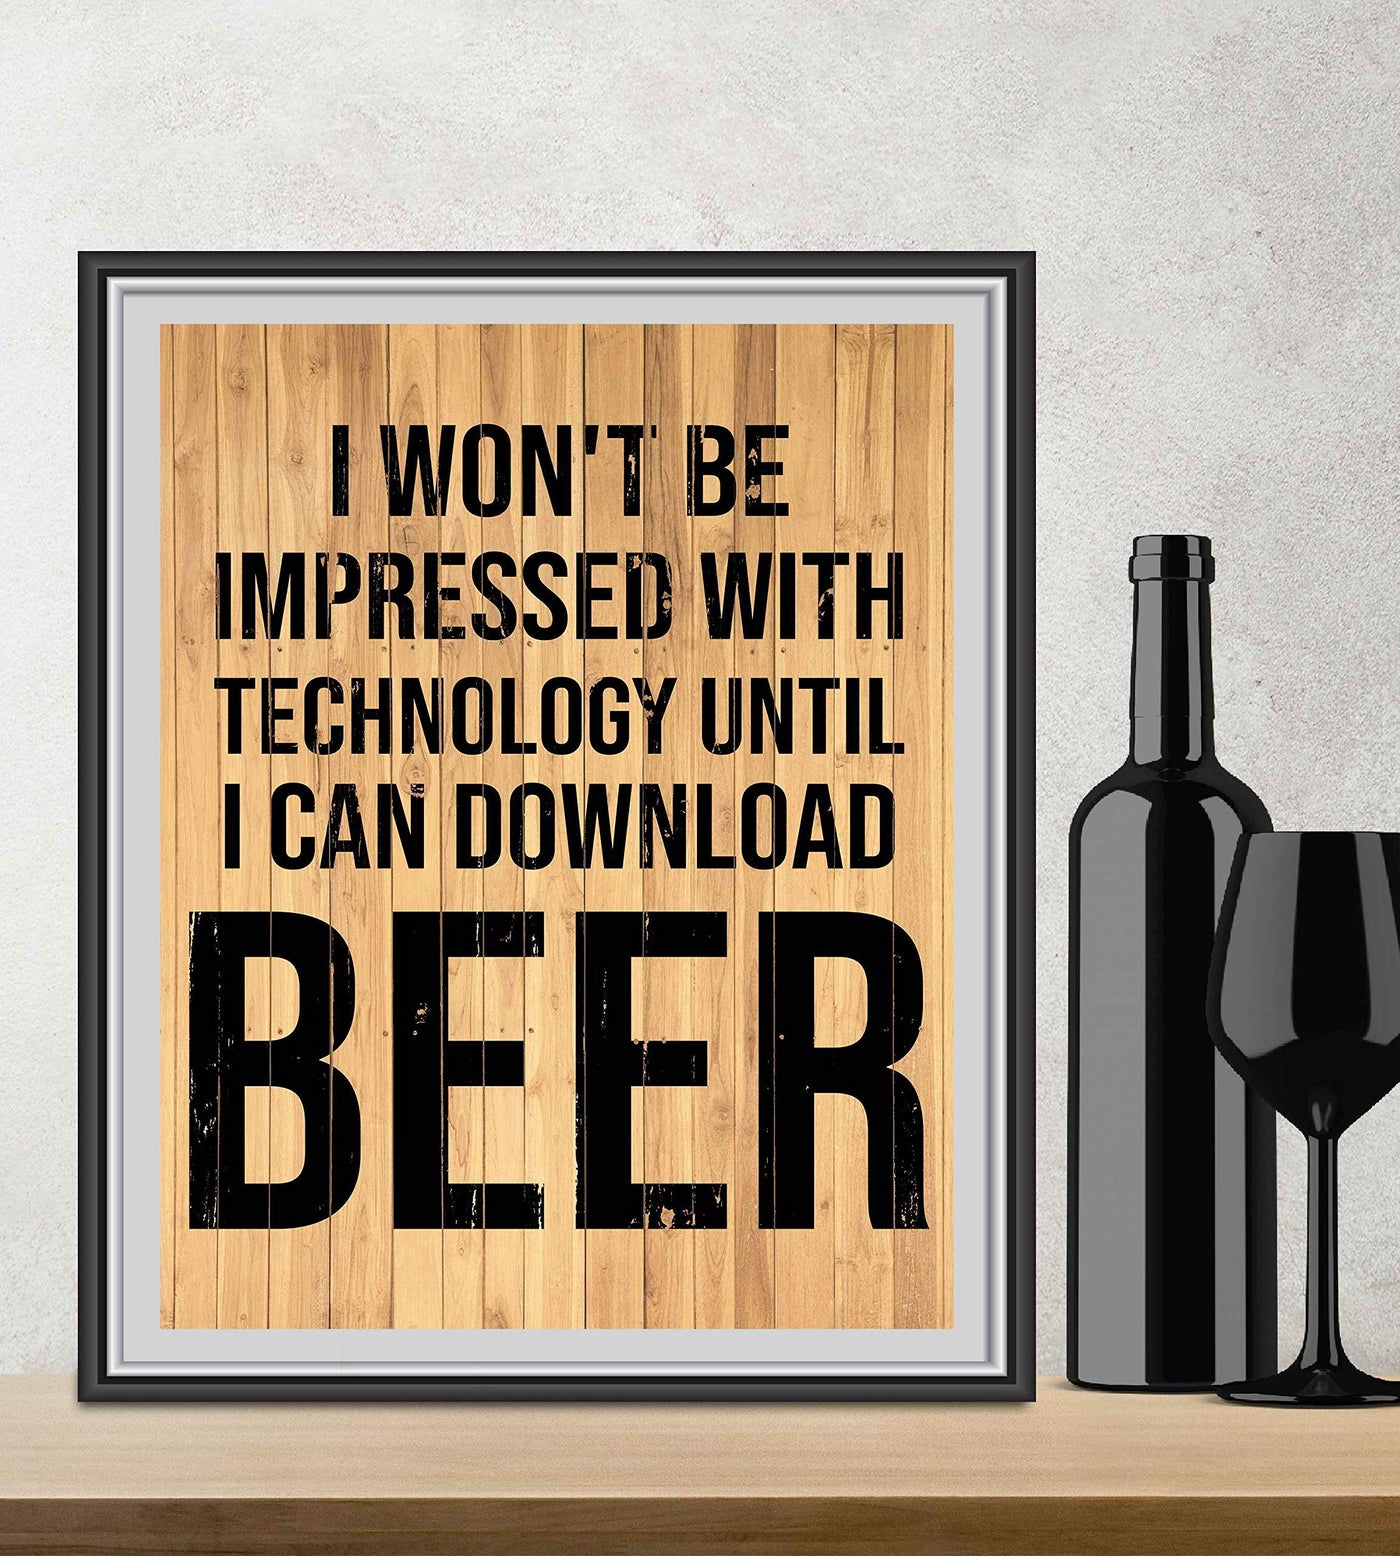 Won't Be Impressed With Technology-Download Beer Funny Beer Sign -8 x 10" Rustic Wall Art Print w/Replica Wood Design-Ready to Frame. Humorous Decor for Home-Man Cave-Bar-Dorm-Pub-Restaurants!